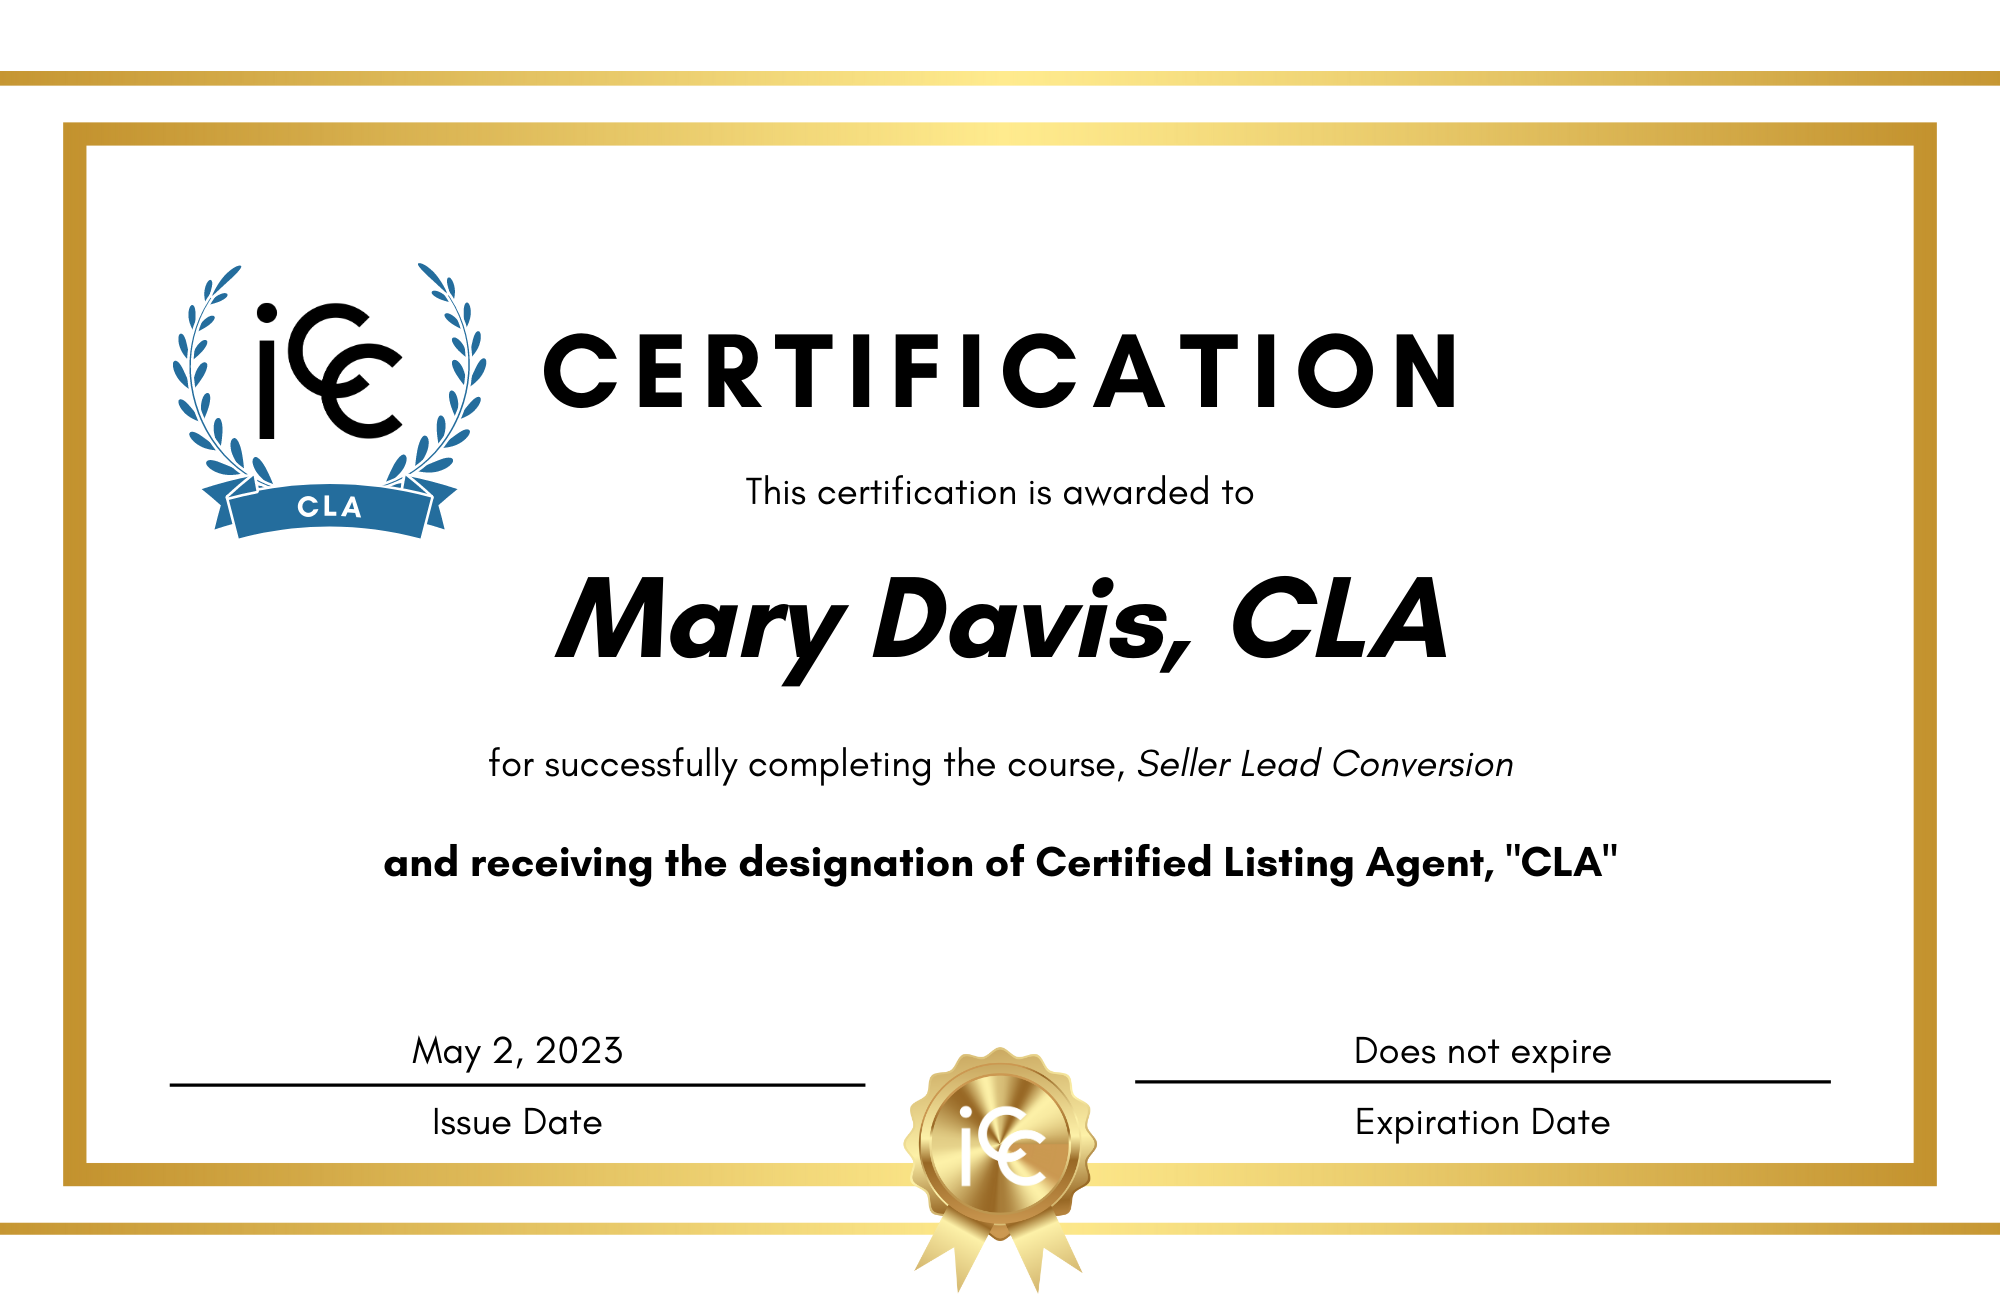 The Seller Lead Conversion Process - Certified Listing Agent “CLA”